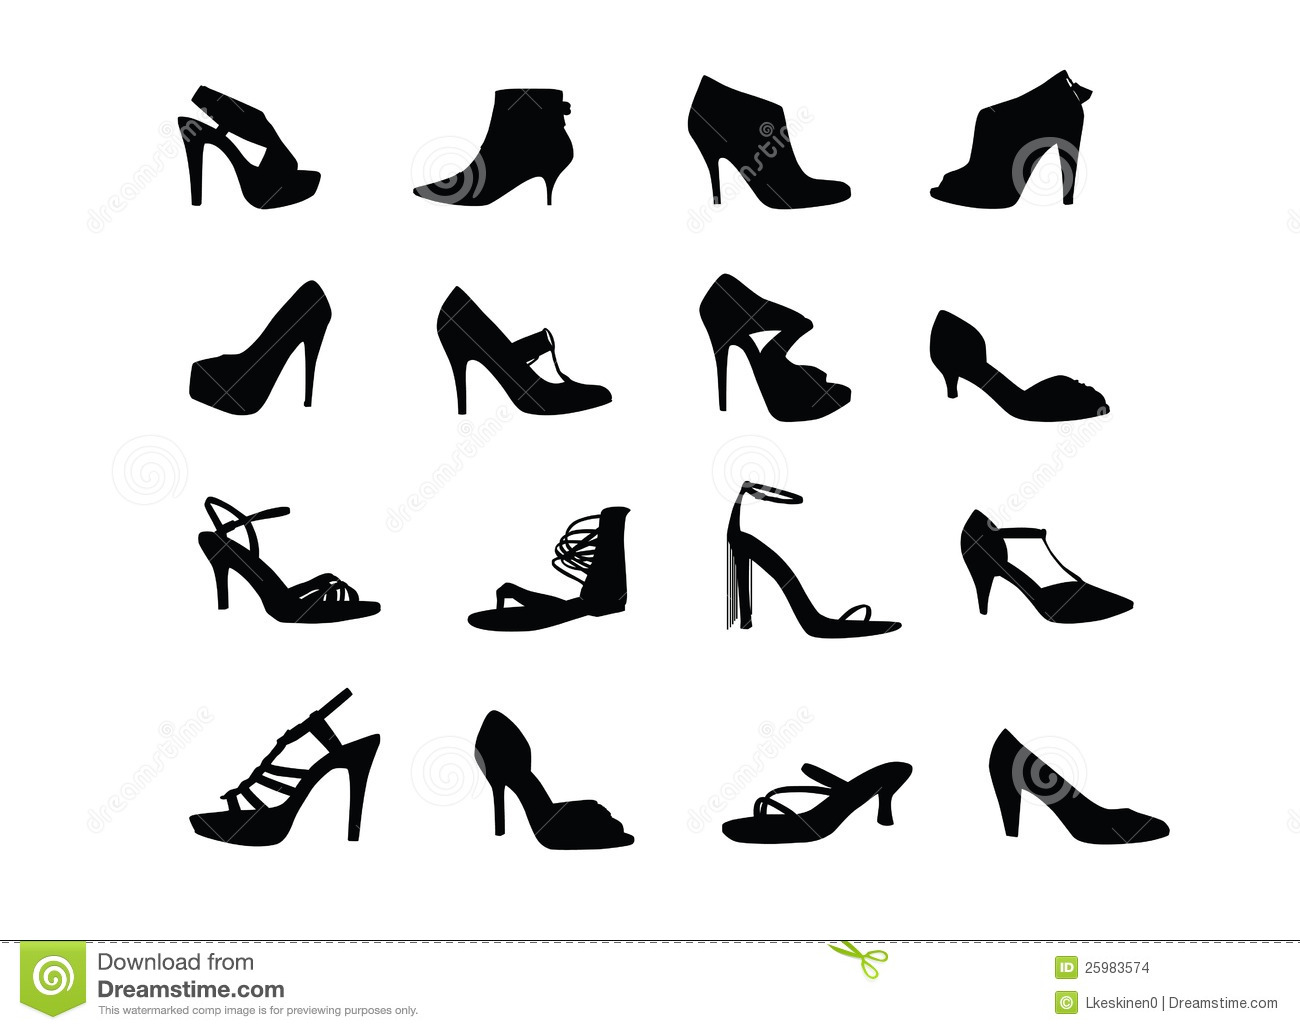 Women Heel Shoes Silhouettes Stock Images   Image  25983574